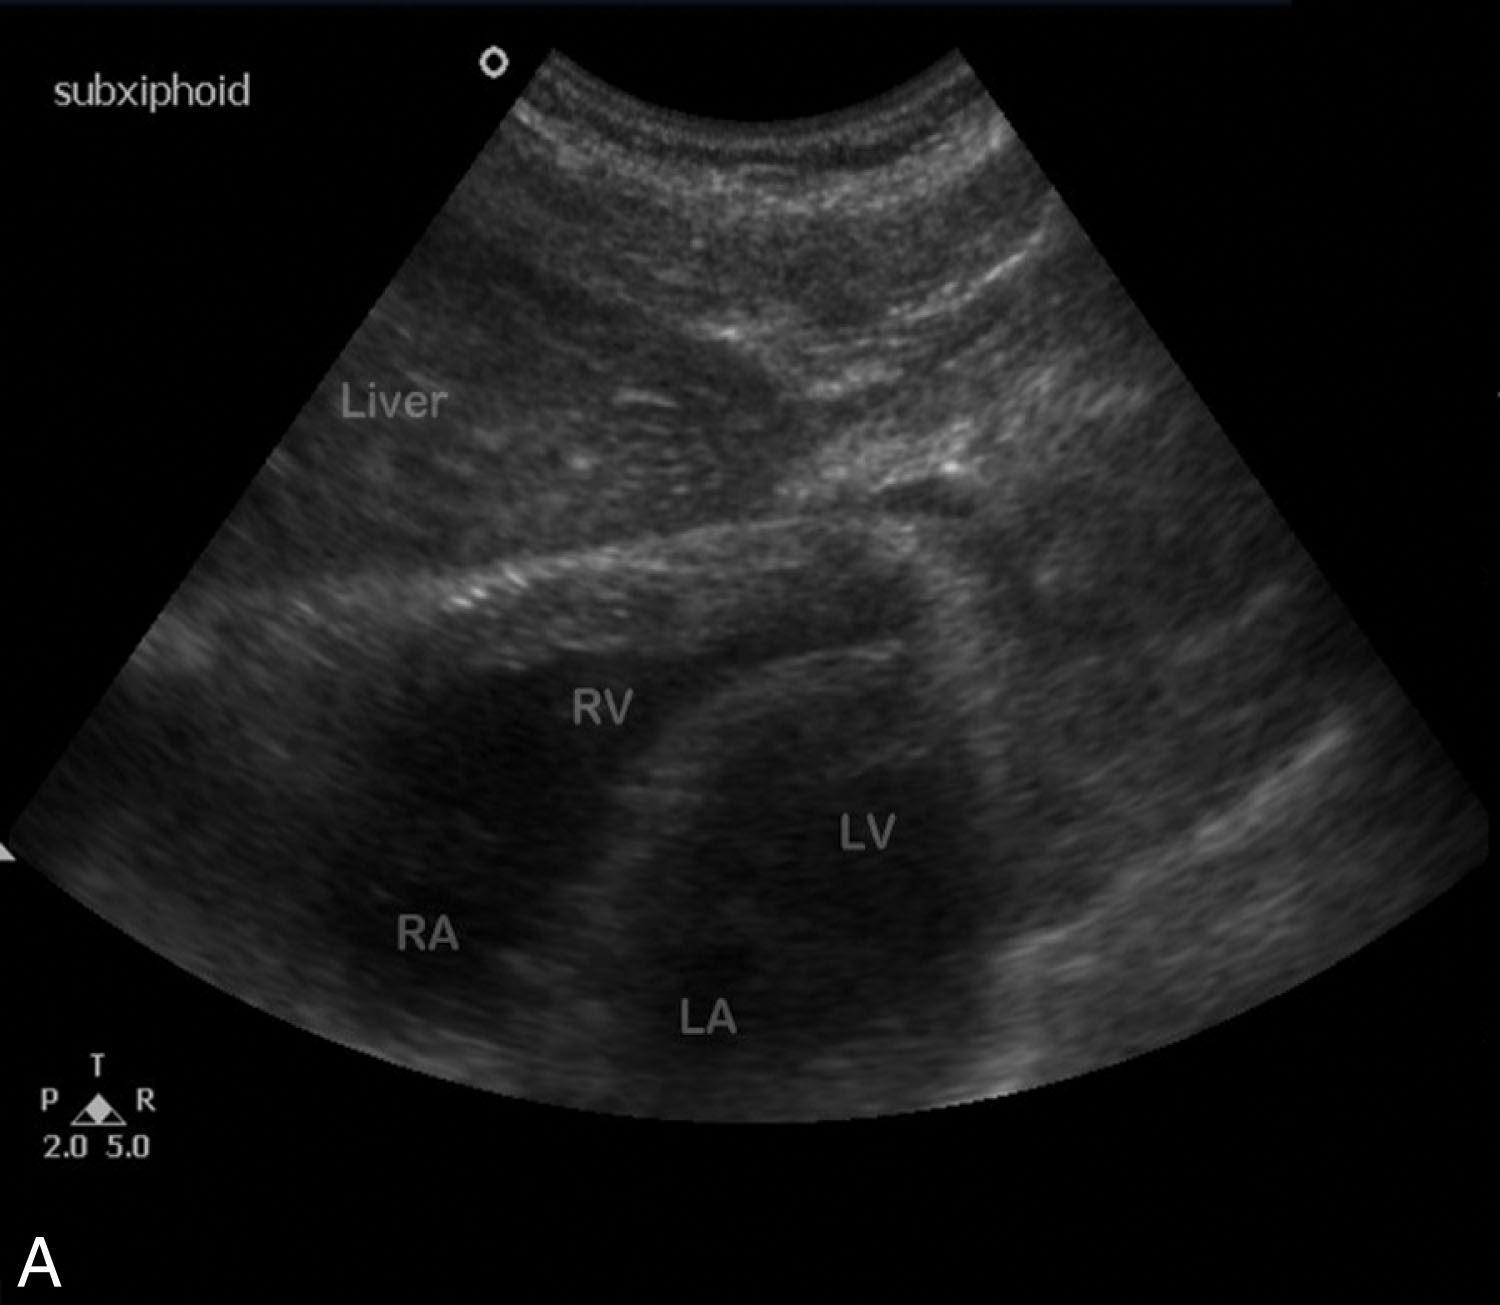 Fig. 19.4, The initial survey is directed in the subcostal plane with the transducer angled in a cephalic direction toward the four-chamber view of the heart to image the pericardial sac. (A) Subcostal view shows no evidence of pericardial fluid. (B) Moderate pericardial fluid seen within the pericardial sac (arrows) , as well as right atrial collapse (curved arrow) that indicates impending tamponade. LA, Left atrium; LV, left ventricle; RA, right atrium, RV, right ventricle.